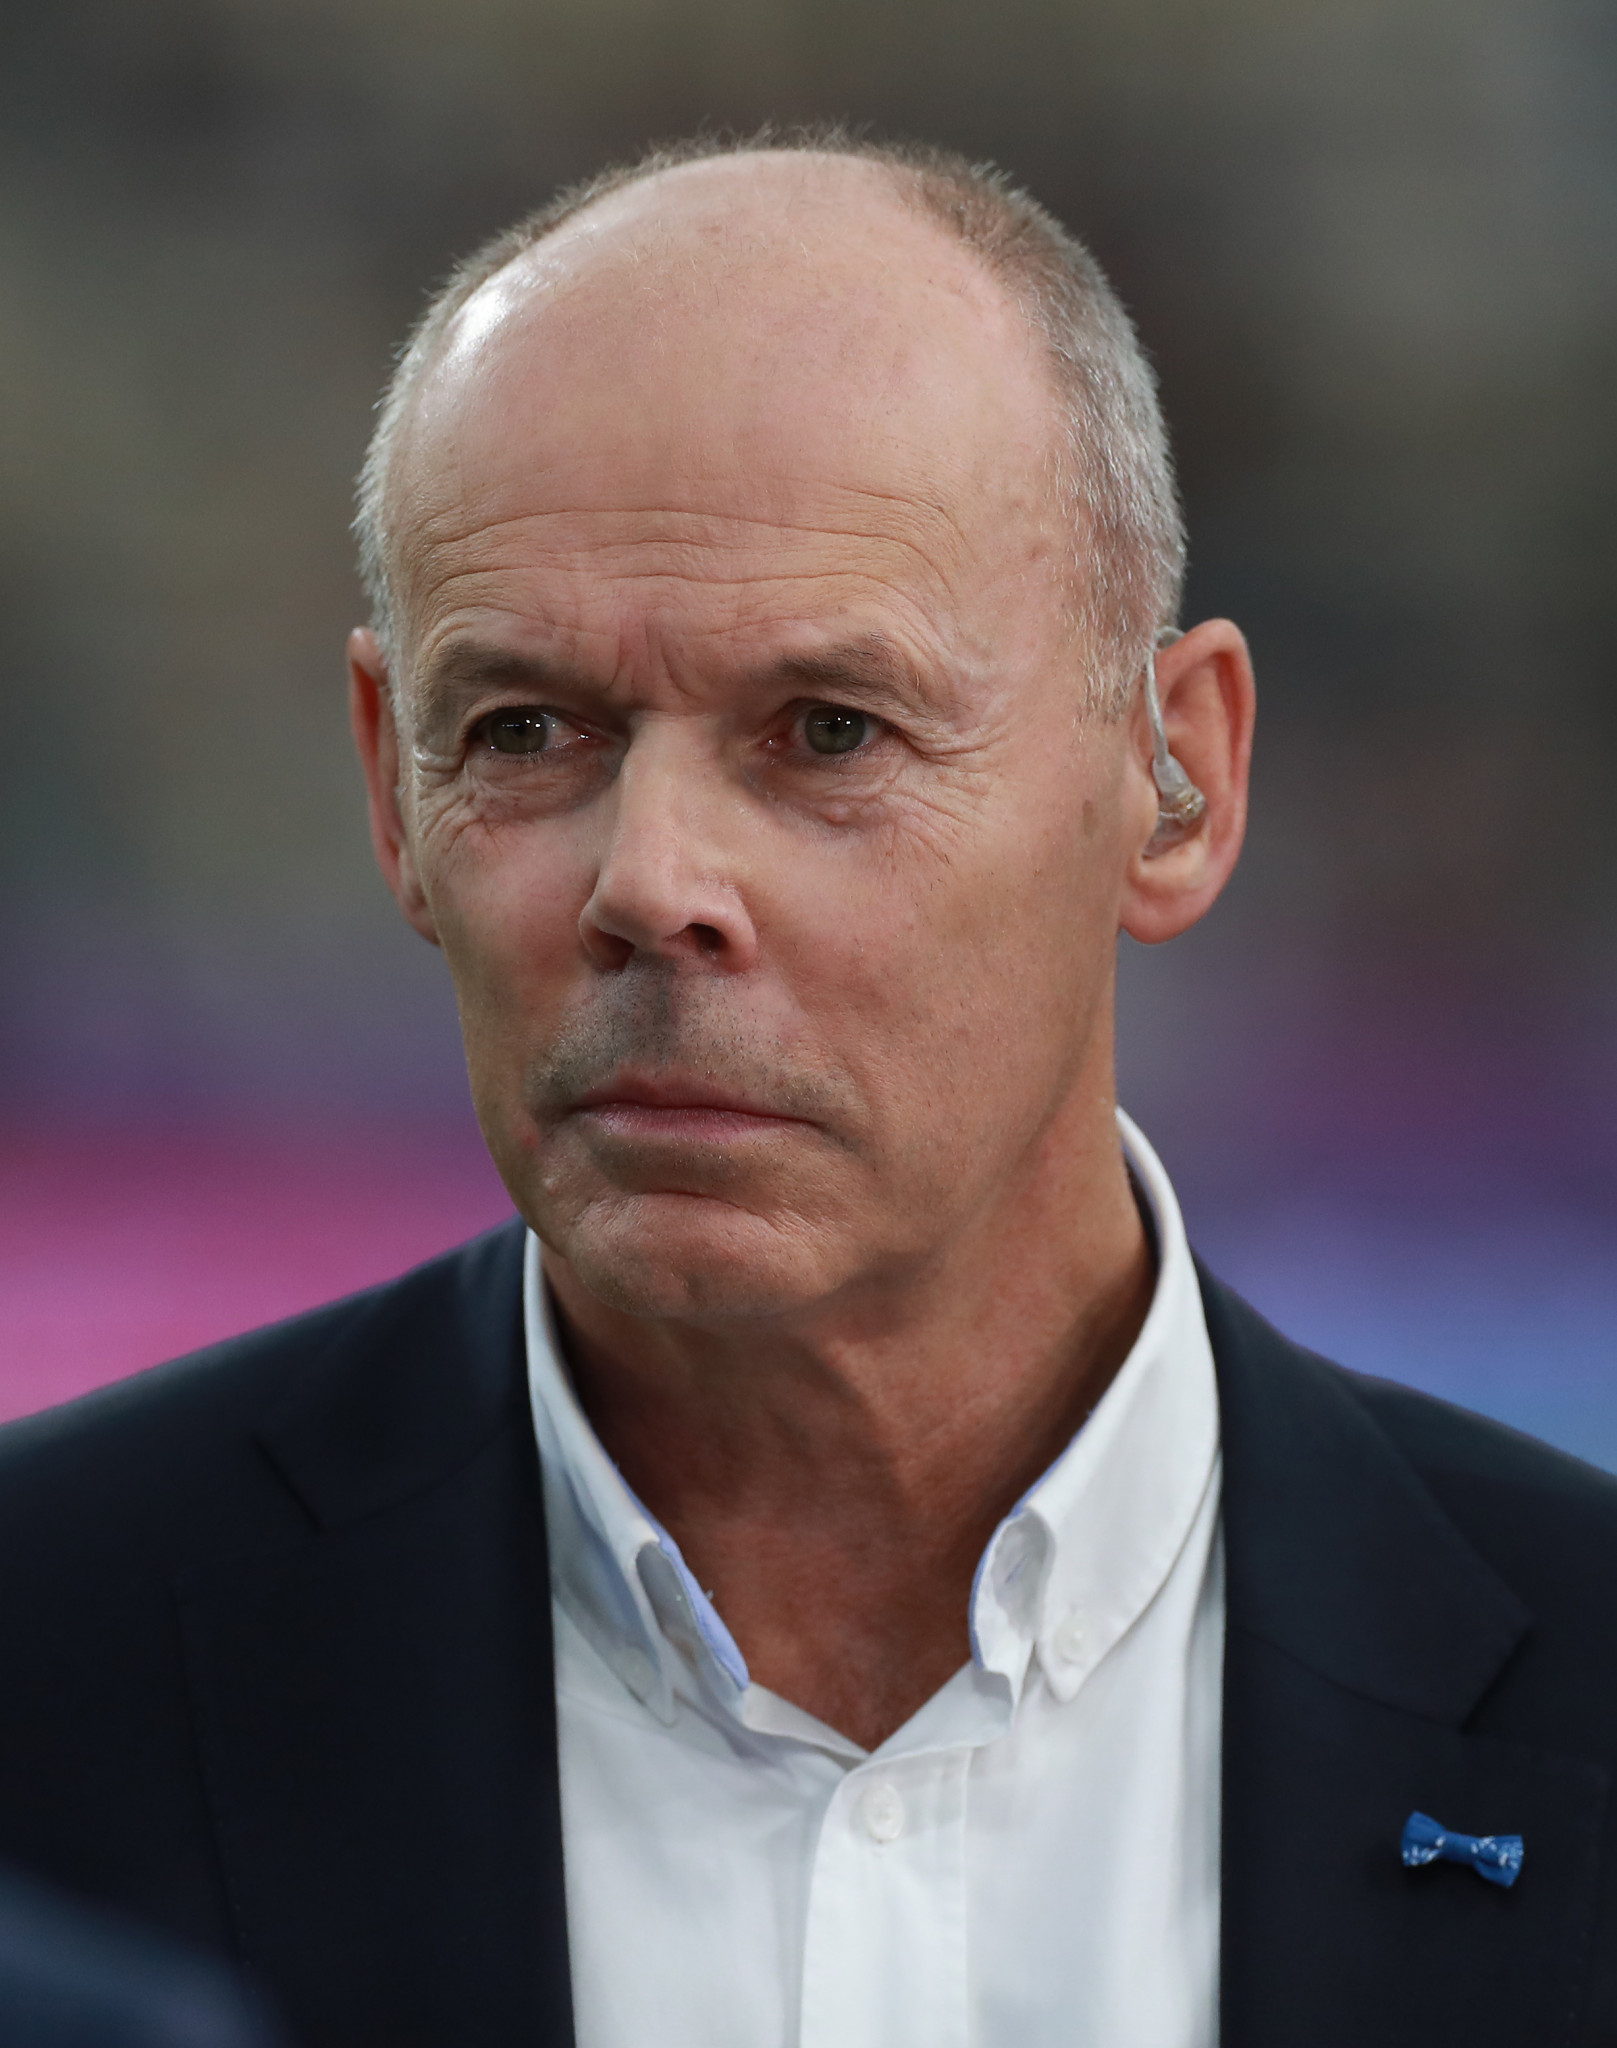 Sir Clive Woodward, who guided England to Rugby World Cup victory in 2003, has urged World Rugby delegates to 